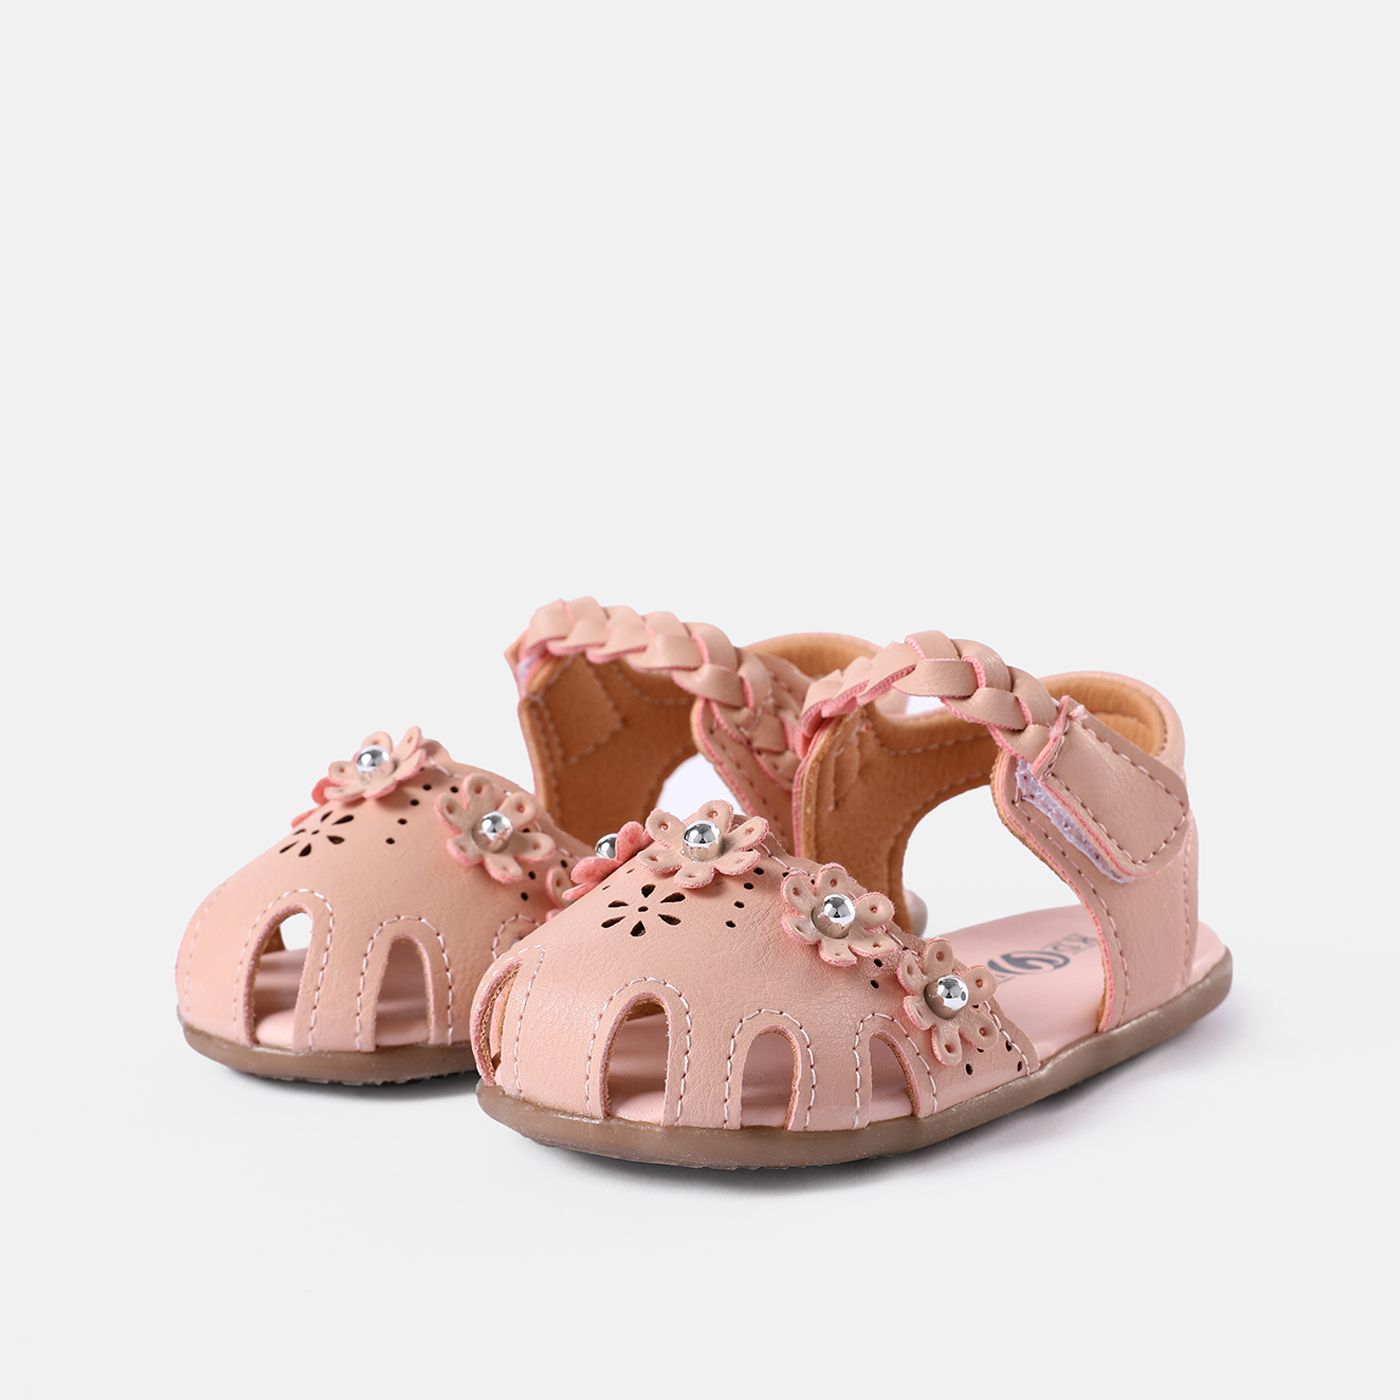 Toddler / Kid Floral Decor Braided Detail Sandals (The direction of the braid is random) (Toddler US